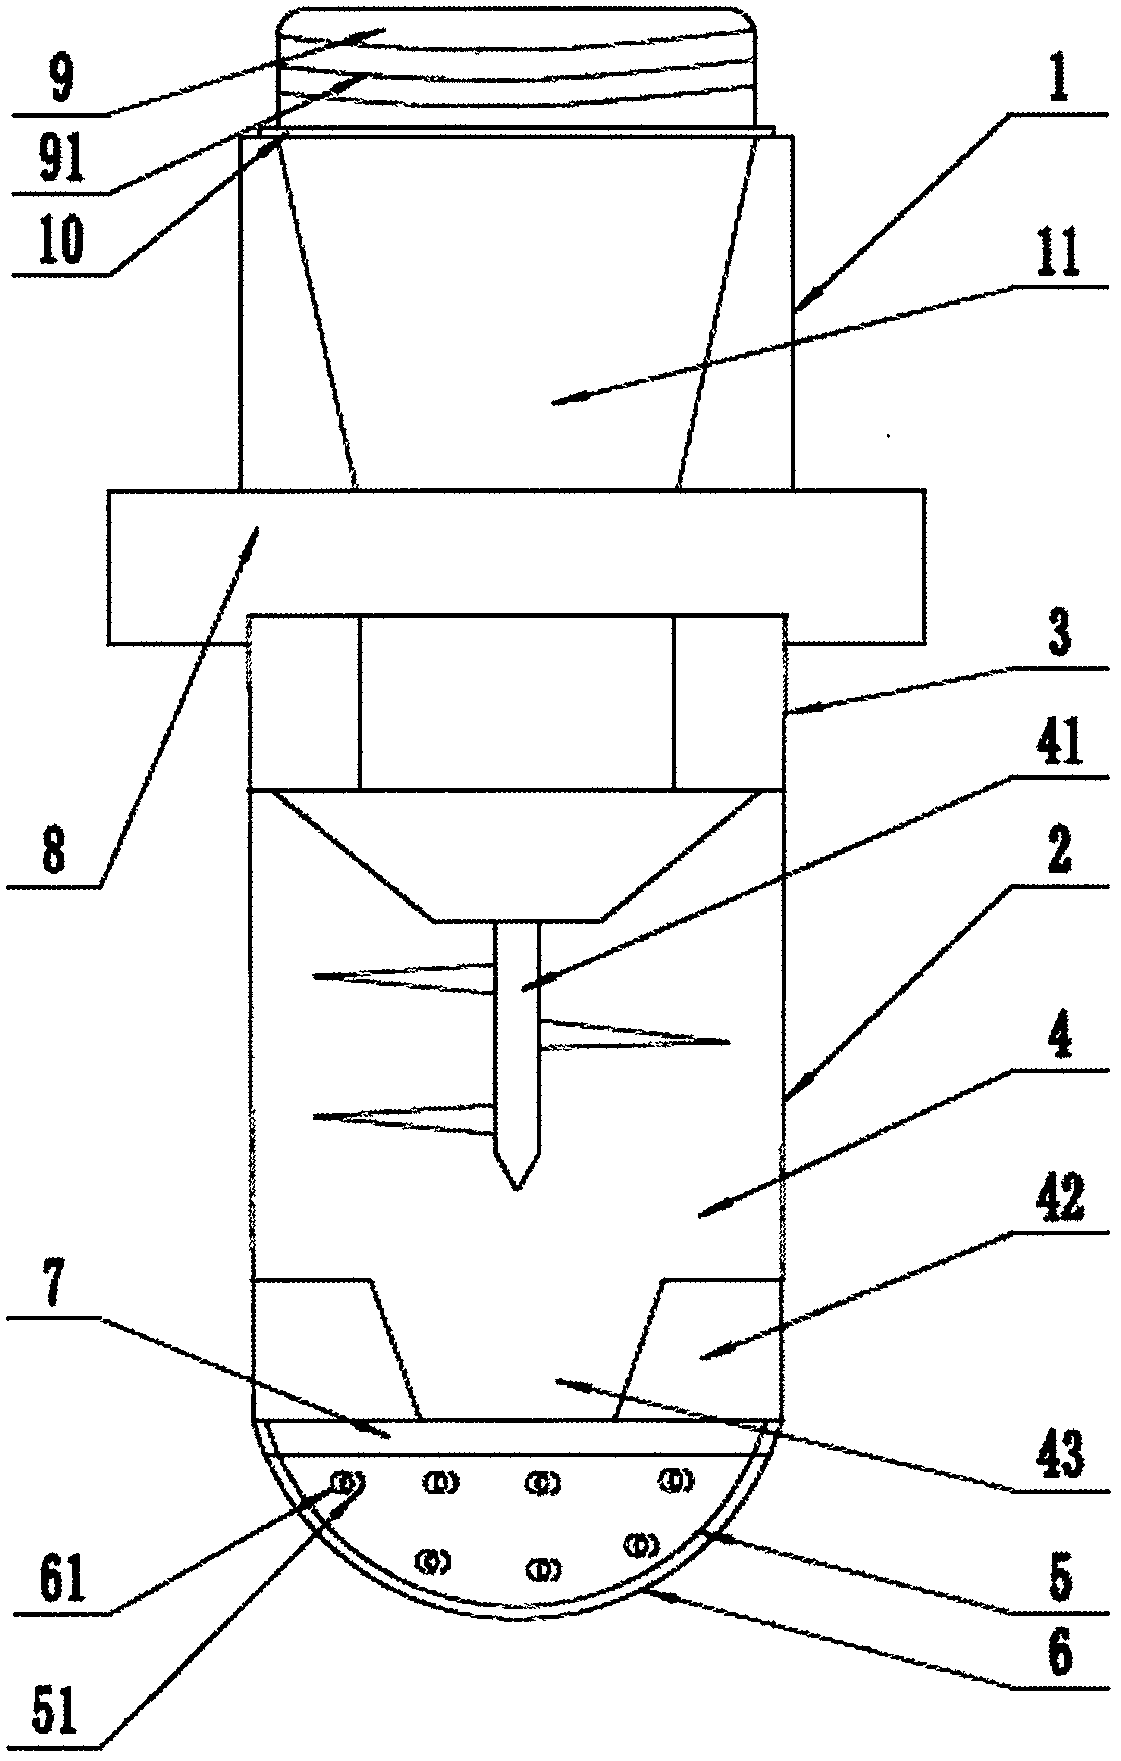 Atomizing nozzle for agricultural helicopter